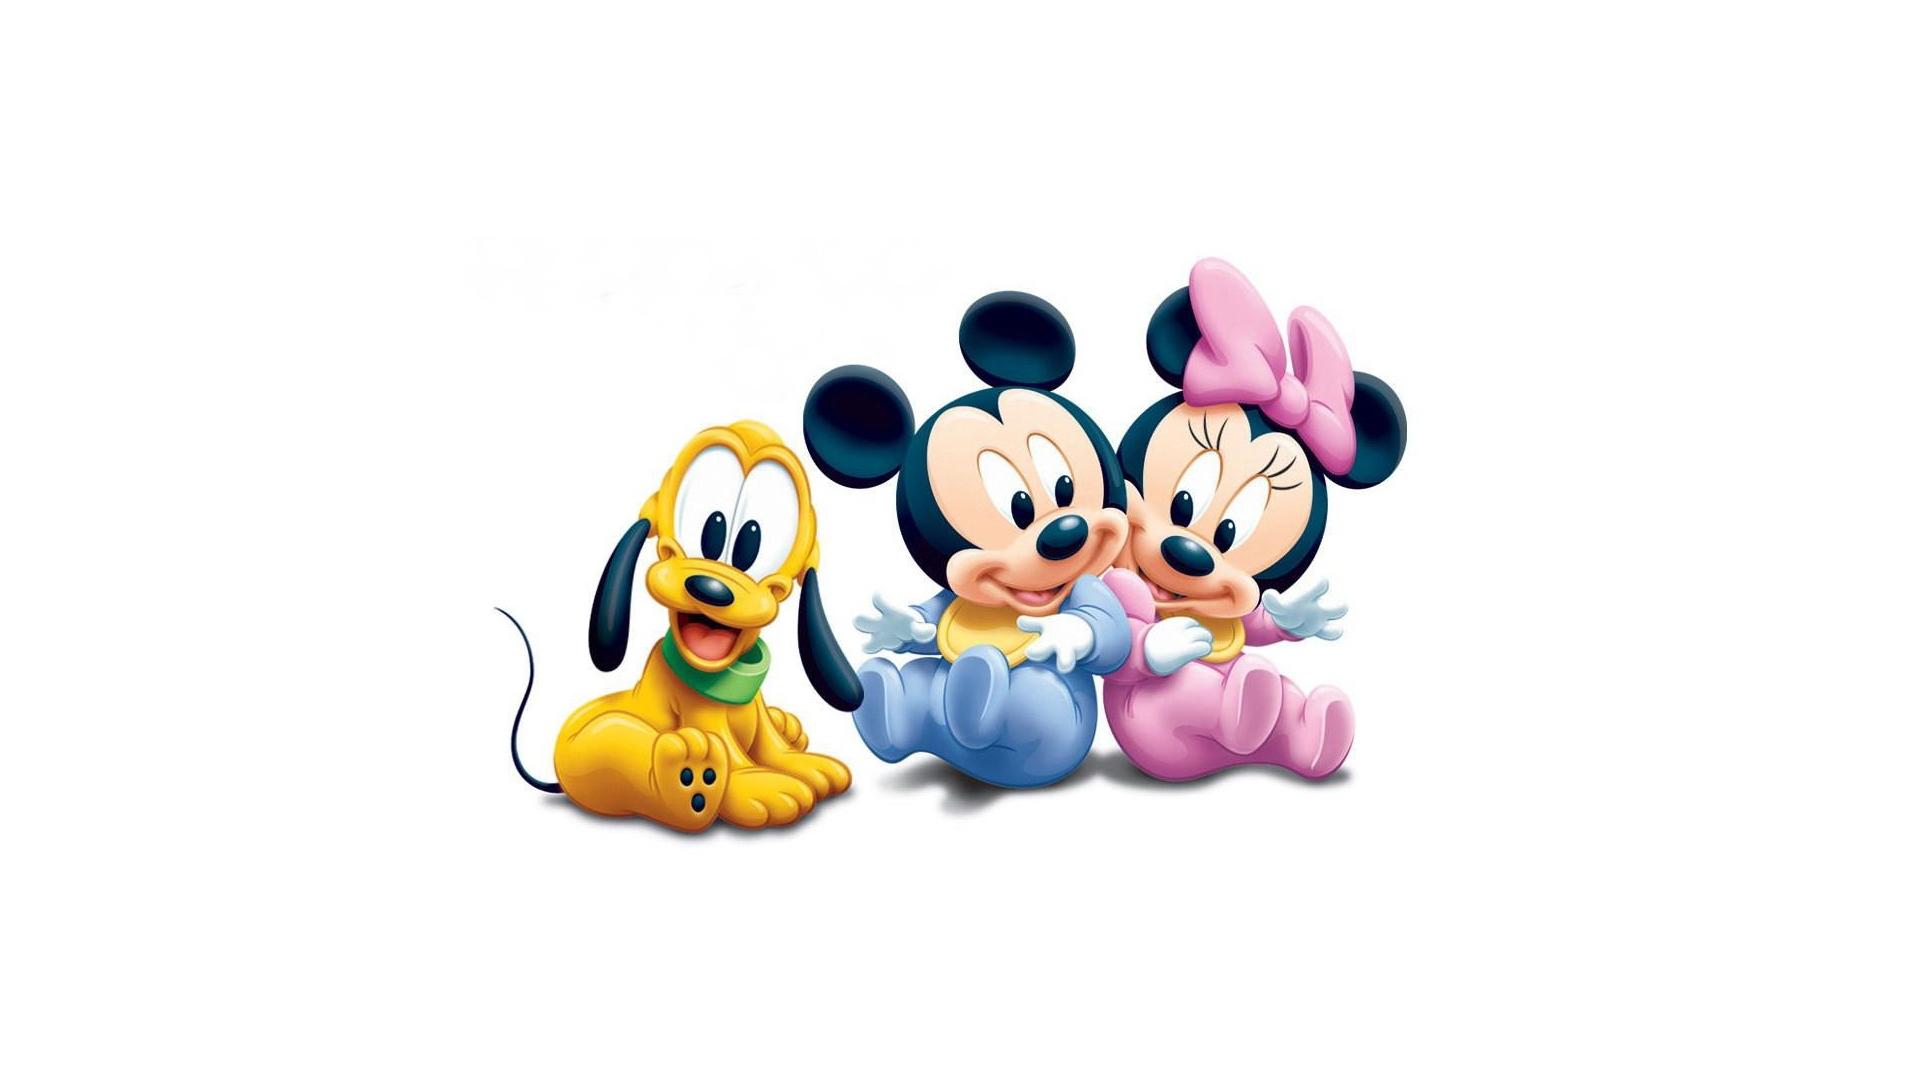 Disney Cartoon Baby Mickey And Minnie Mouse Wallpaper